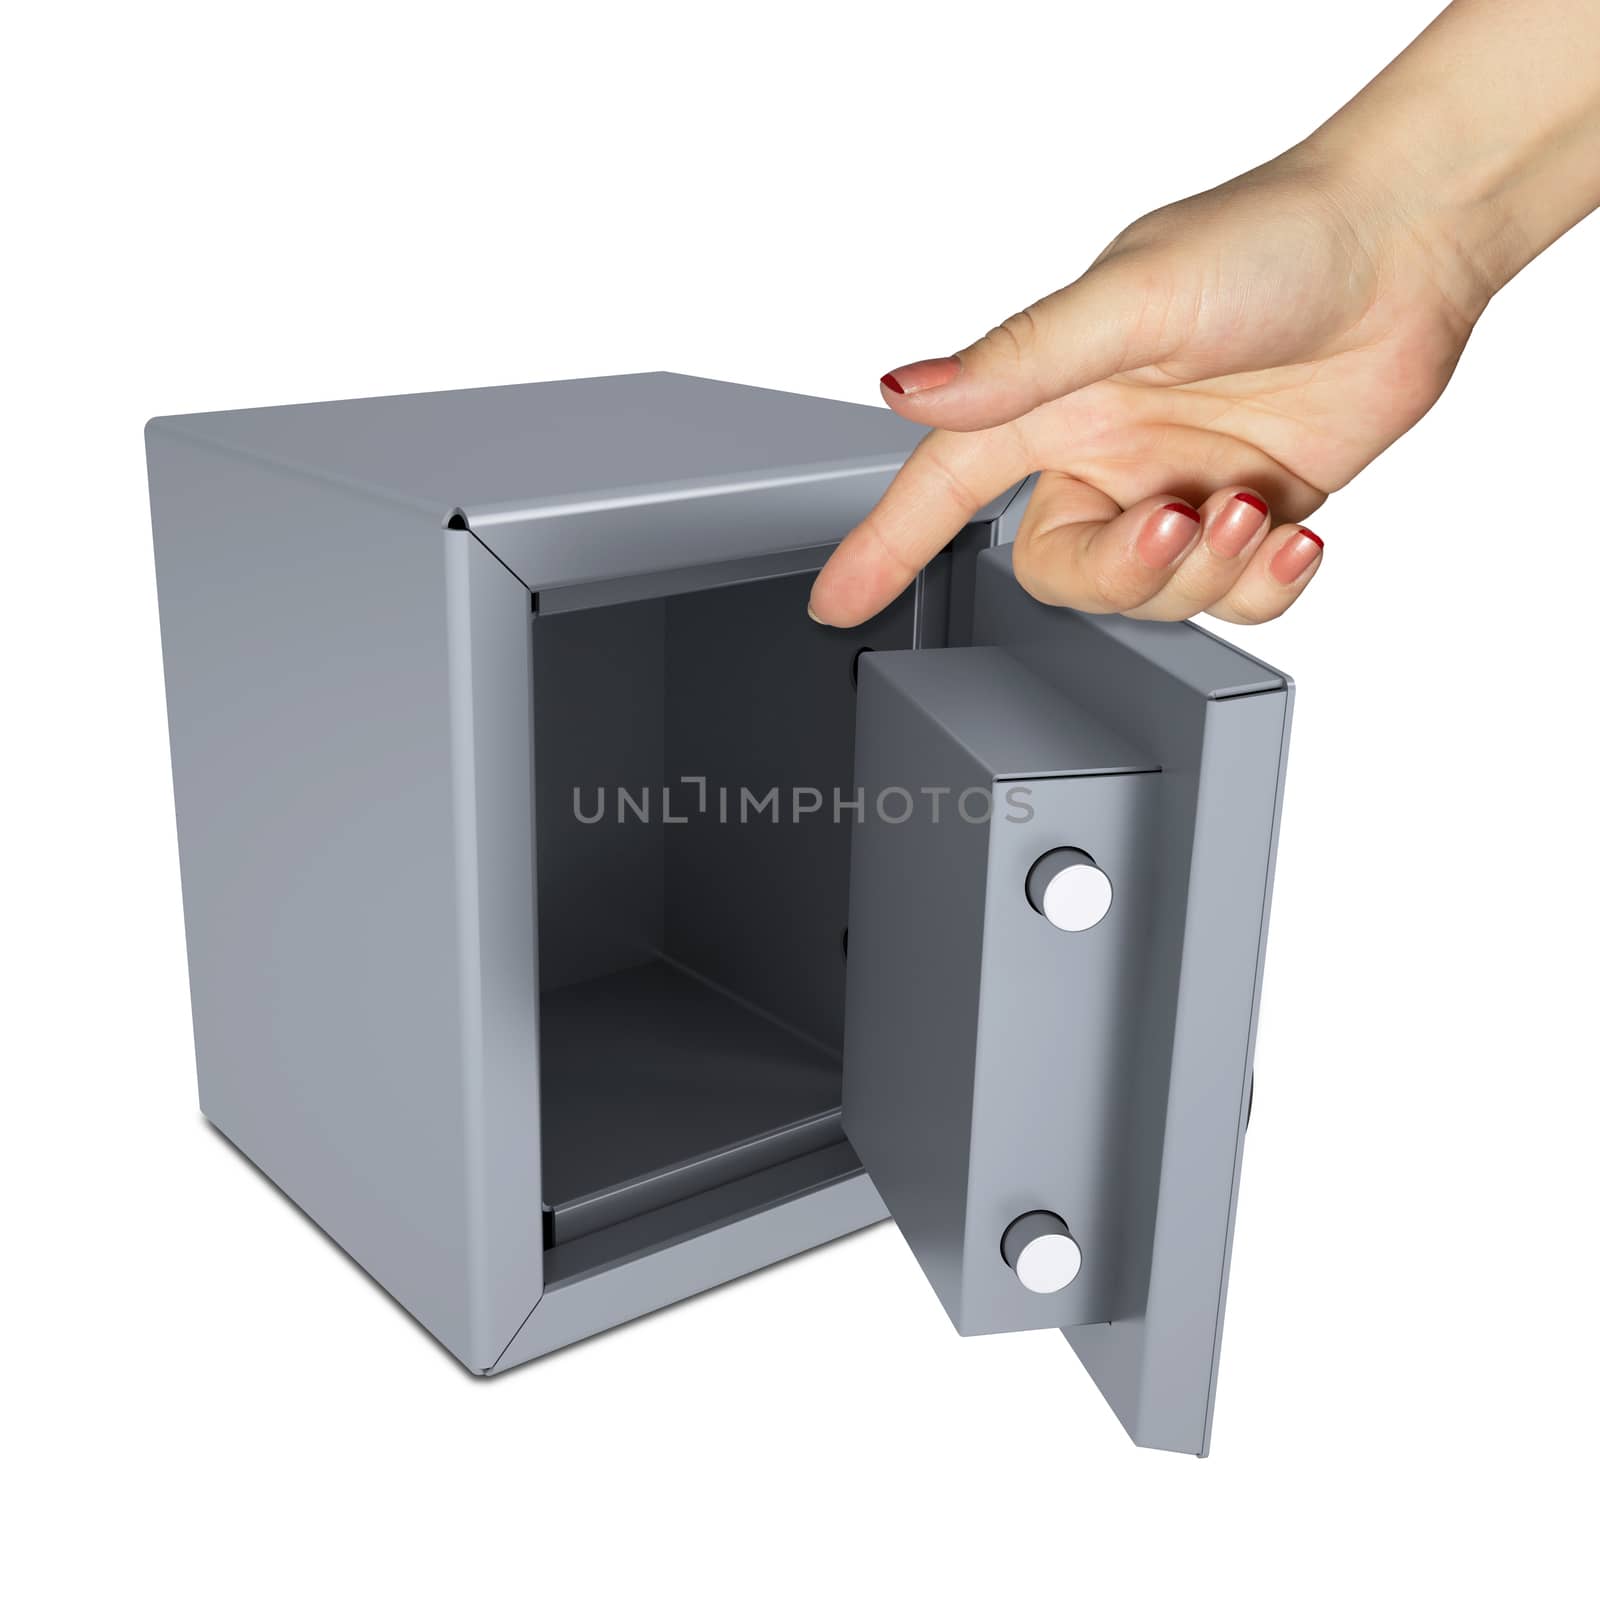 Hand pointing to the open safe. Isolated on white background. safety concept